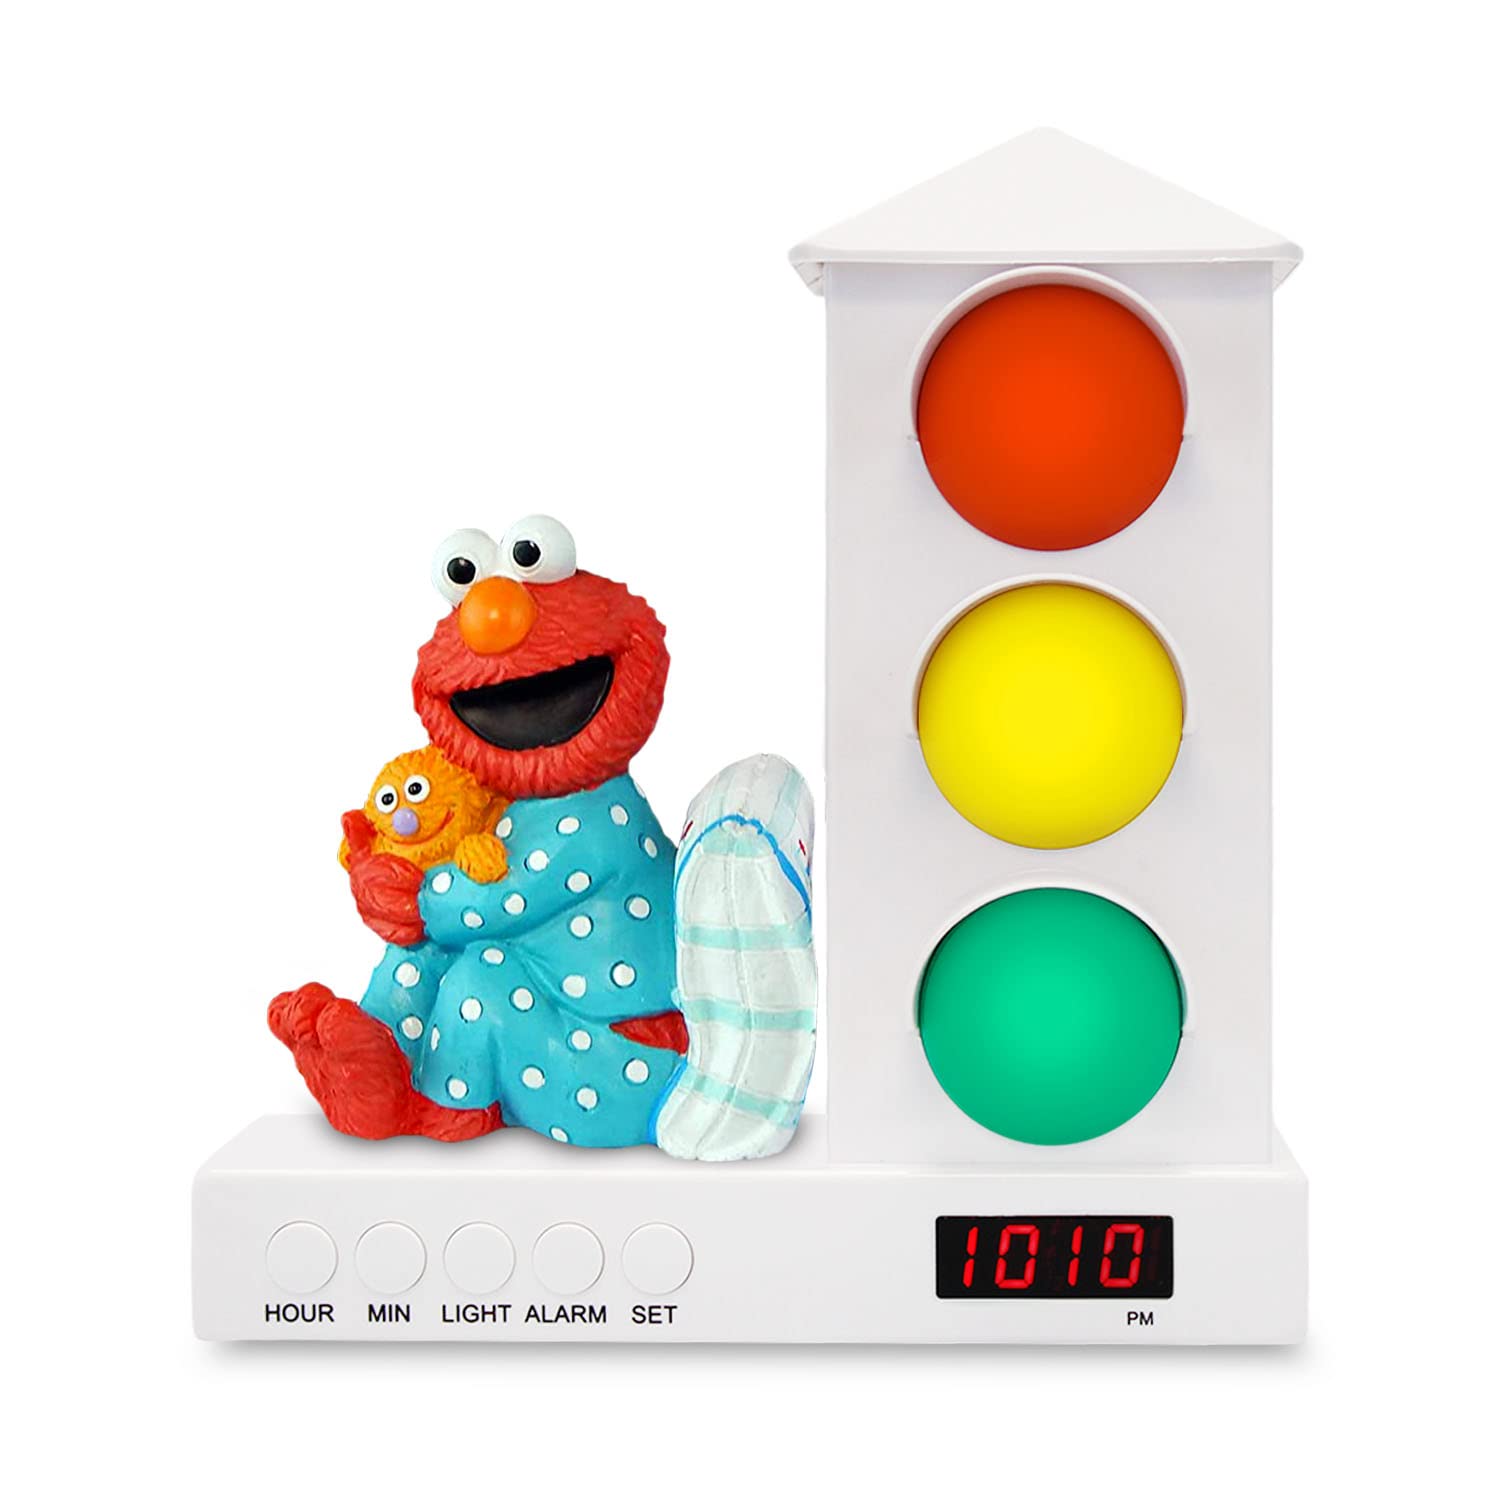 It's About Time Stoplight Sleep Enhancing Alarm Clock for Kids, Elmo's Bedtime